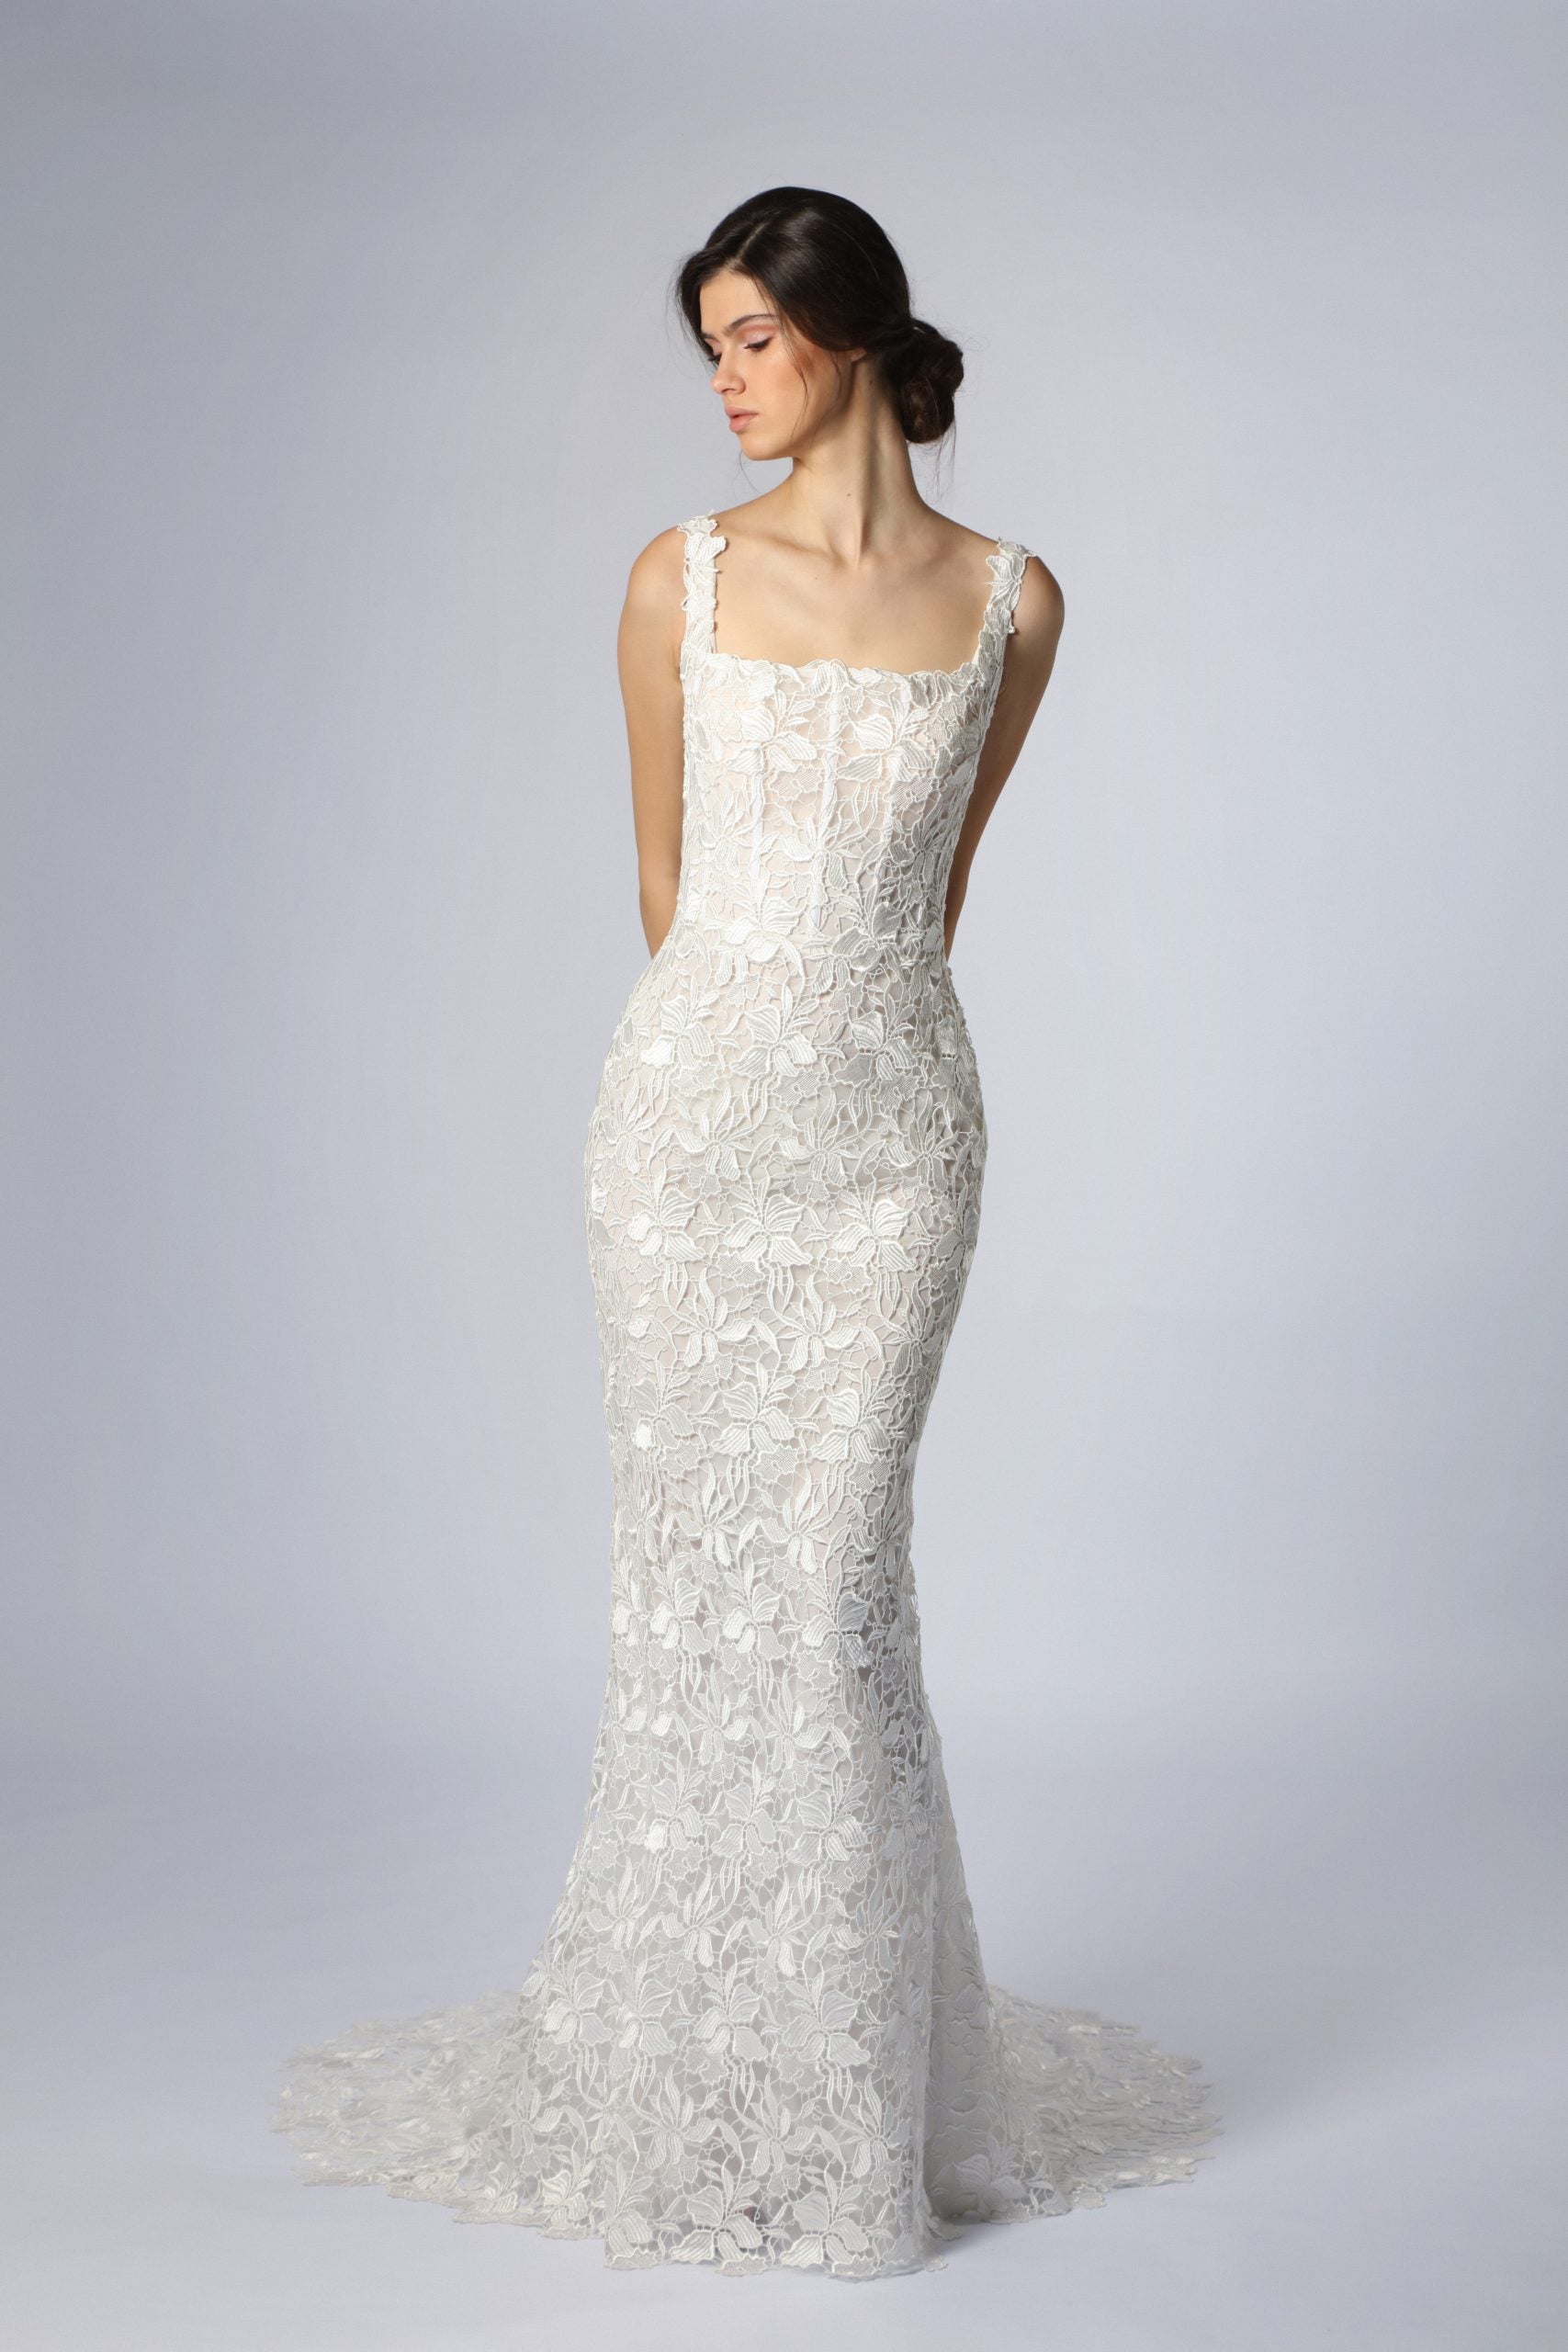 Square-Neck Lace Fit-and-Flare Gown by Tony Ward - Image 1